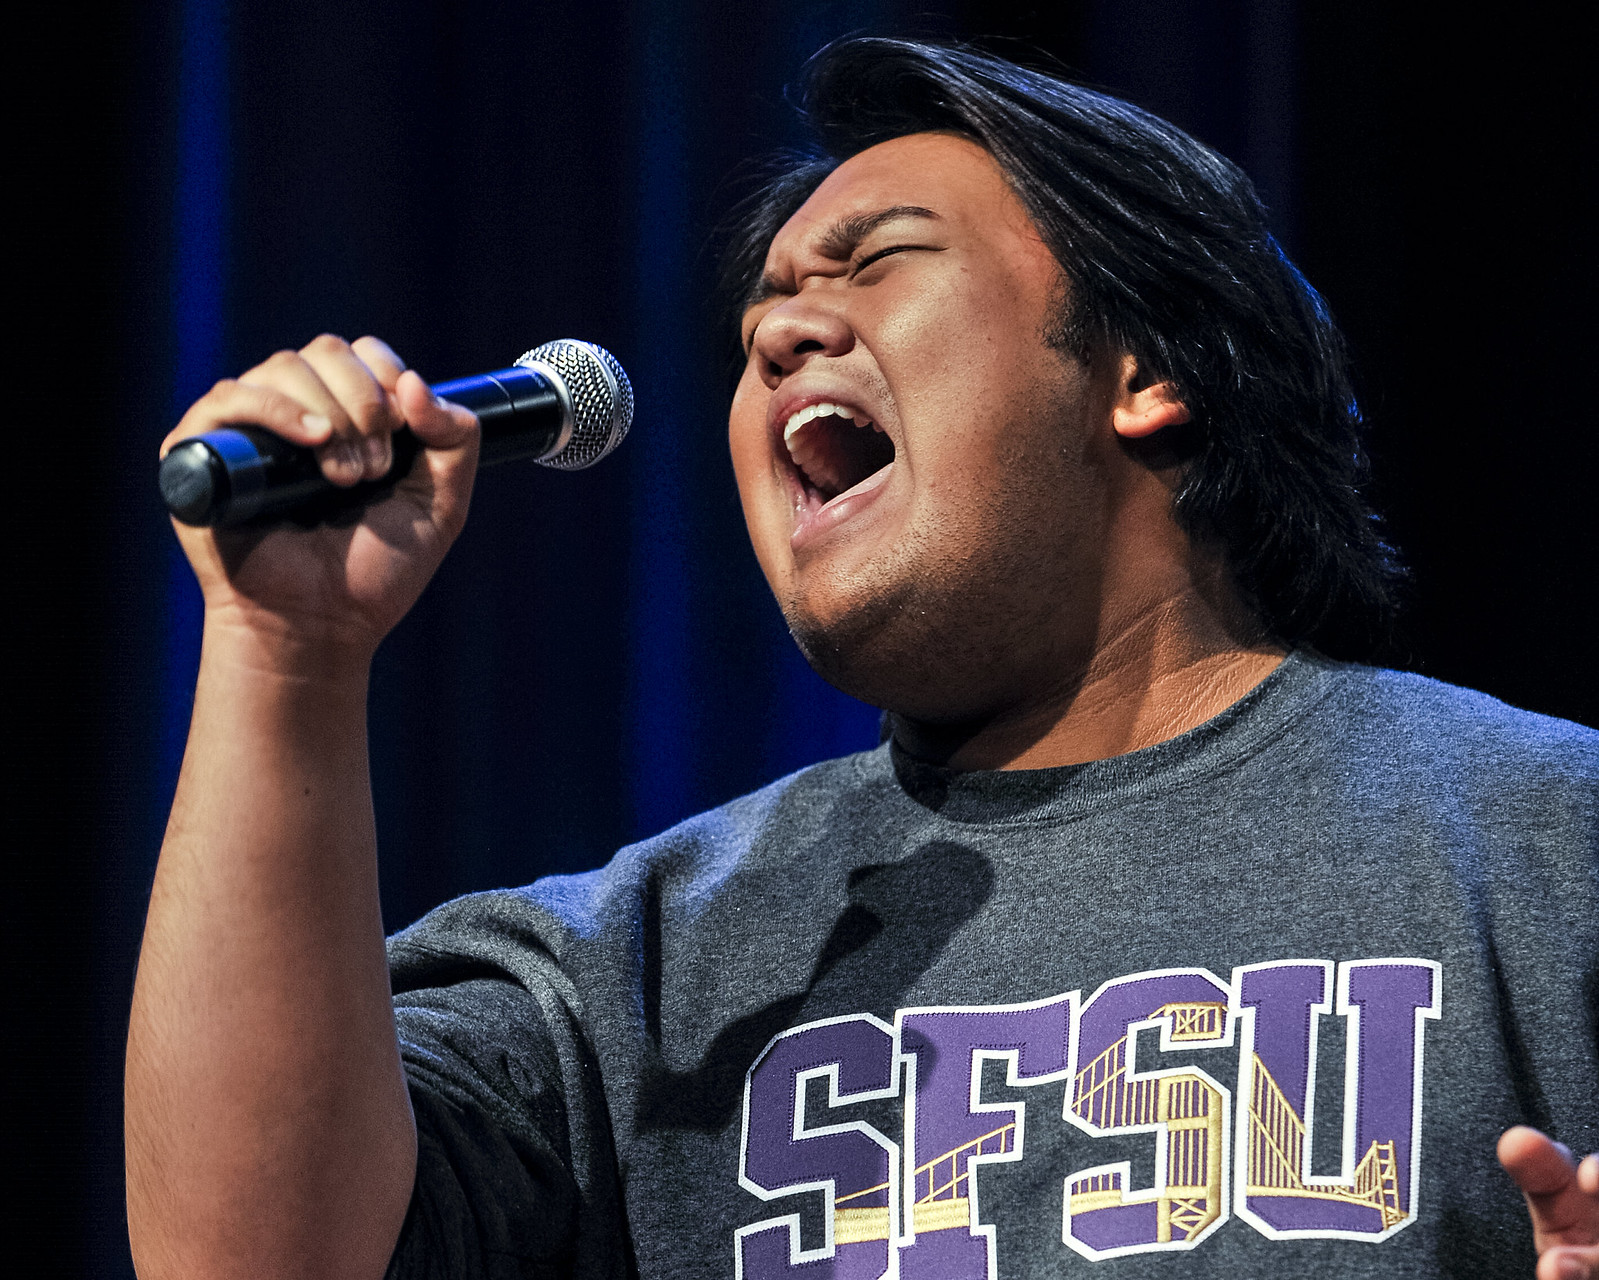 Kai Santiago giving it his all during his audition for the SF State's Voice singing competition in Jack Adams Hall in the Cesar Chavez Student Center on Wednesday, Oct. 2, 2013. Photo by Benjamin Kamps / Xpress